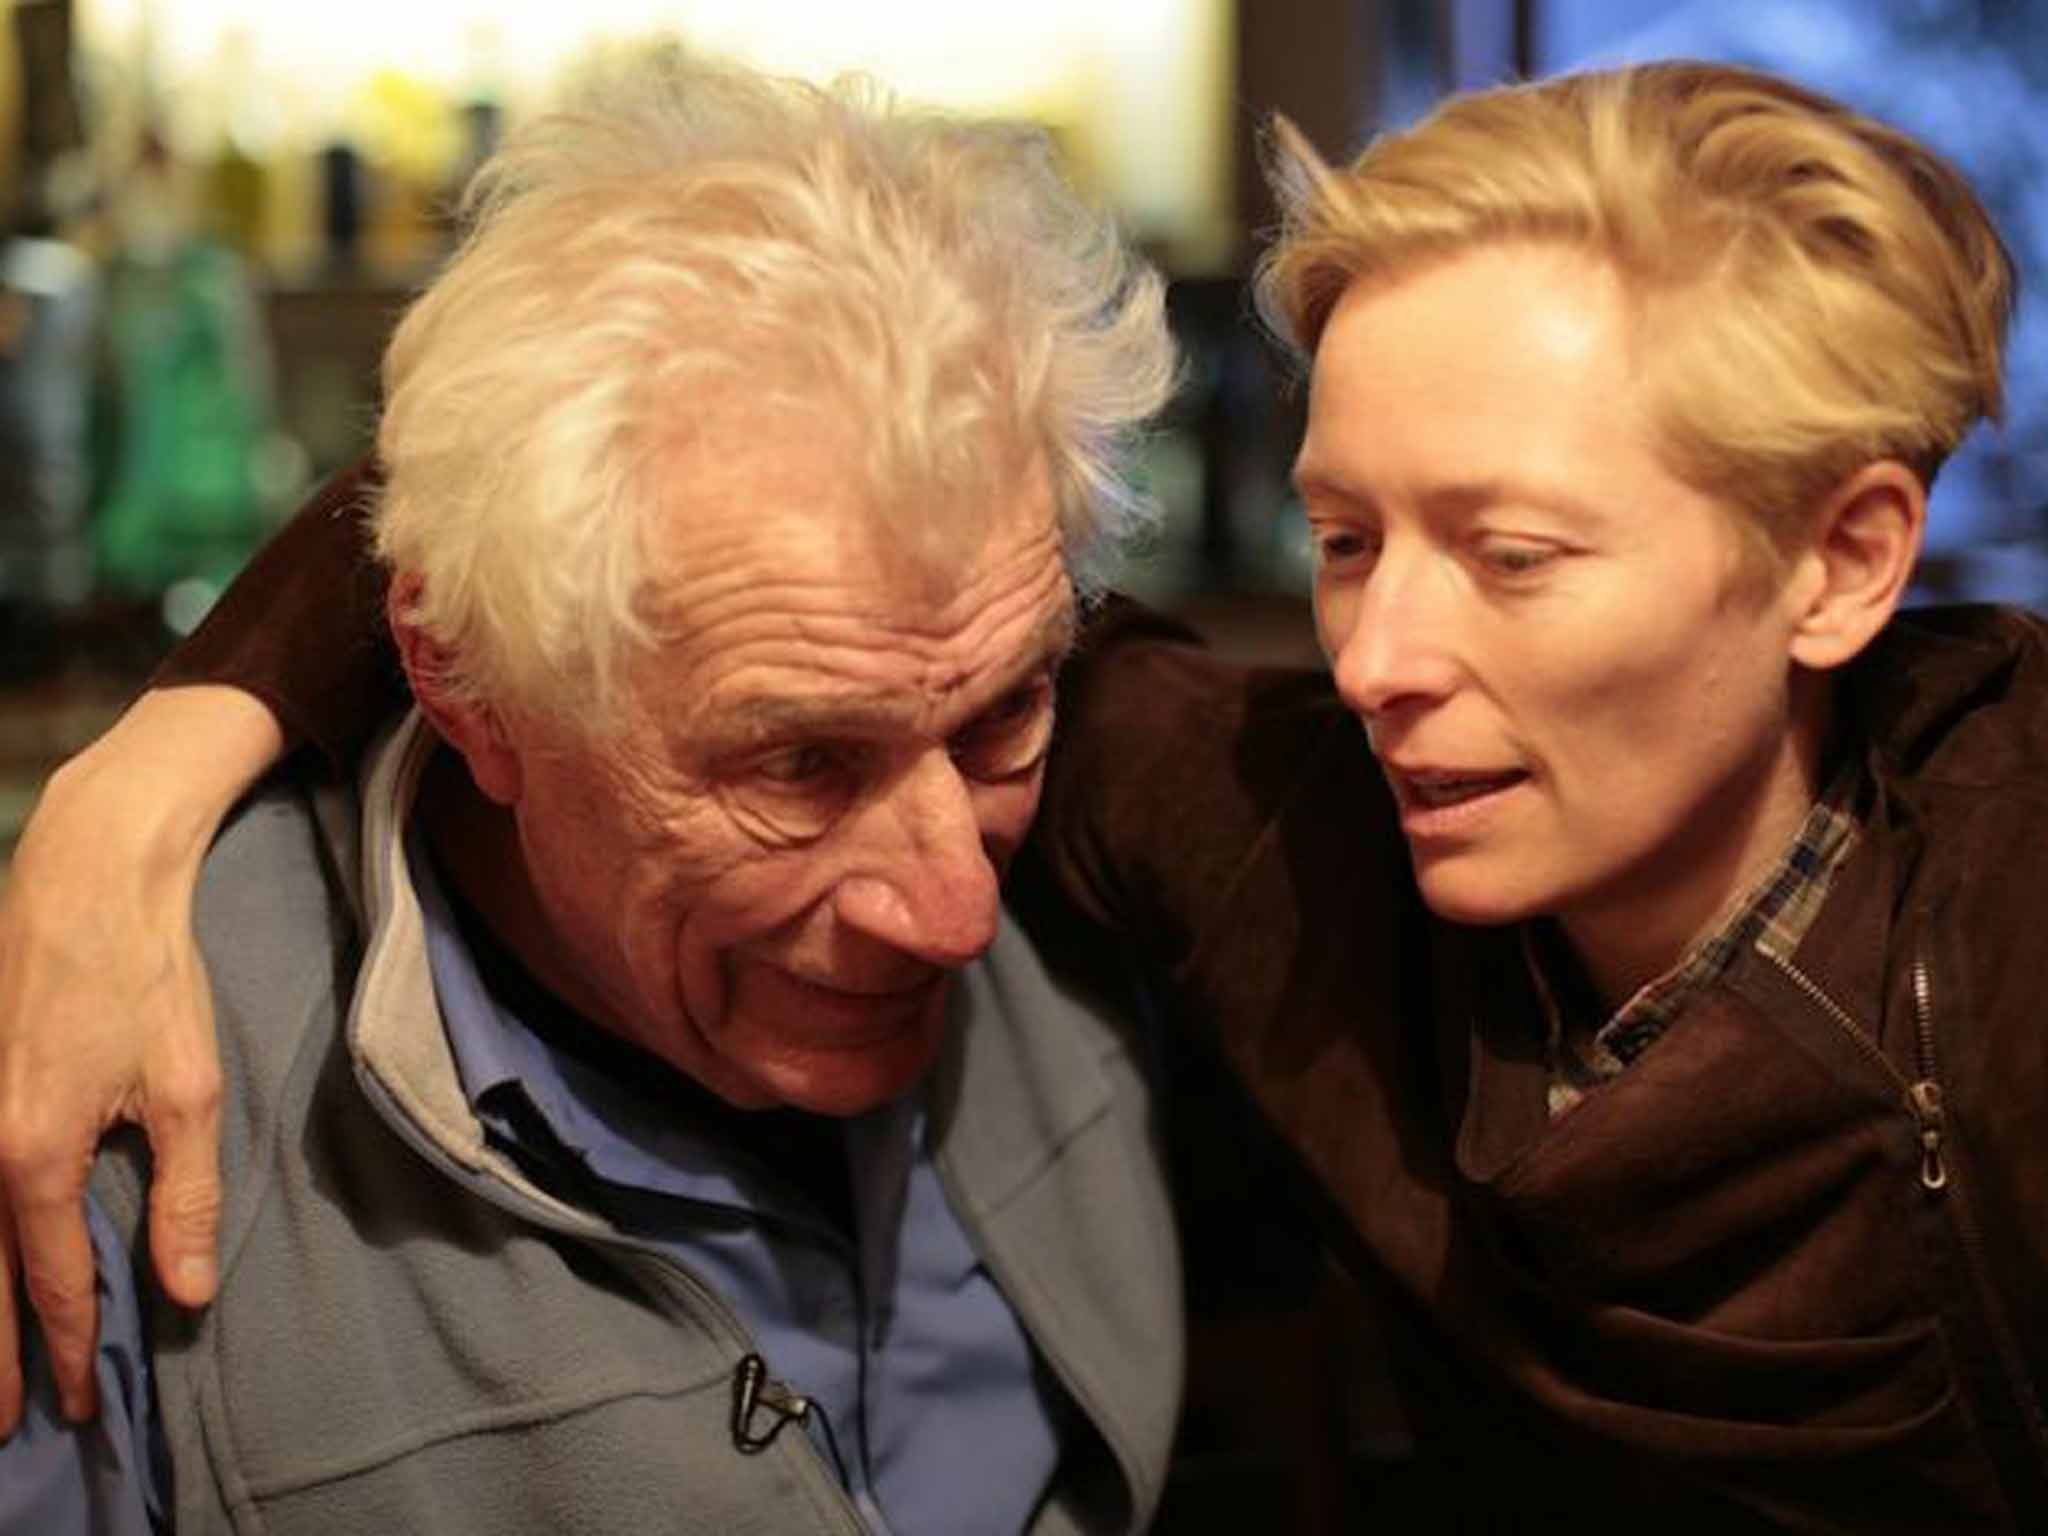 John Berger and Tilda Swinton: Born in the same city on the same day, 34 years apart